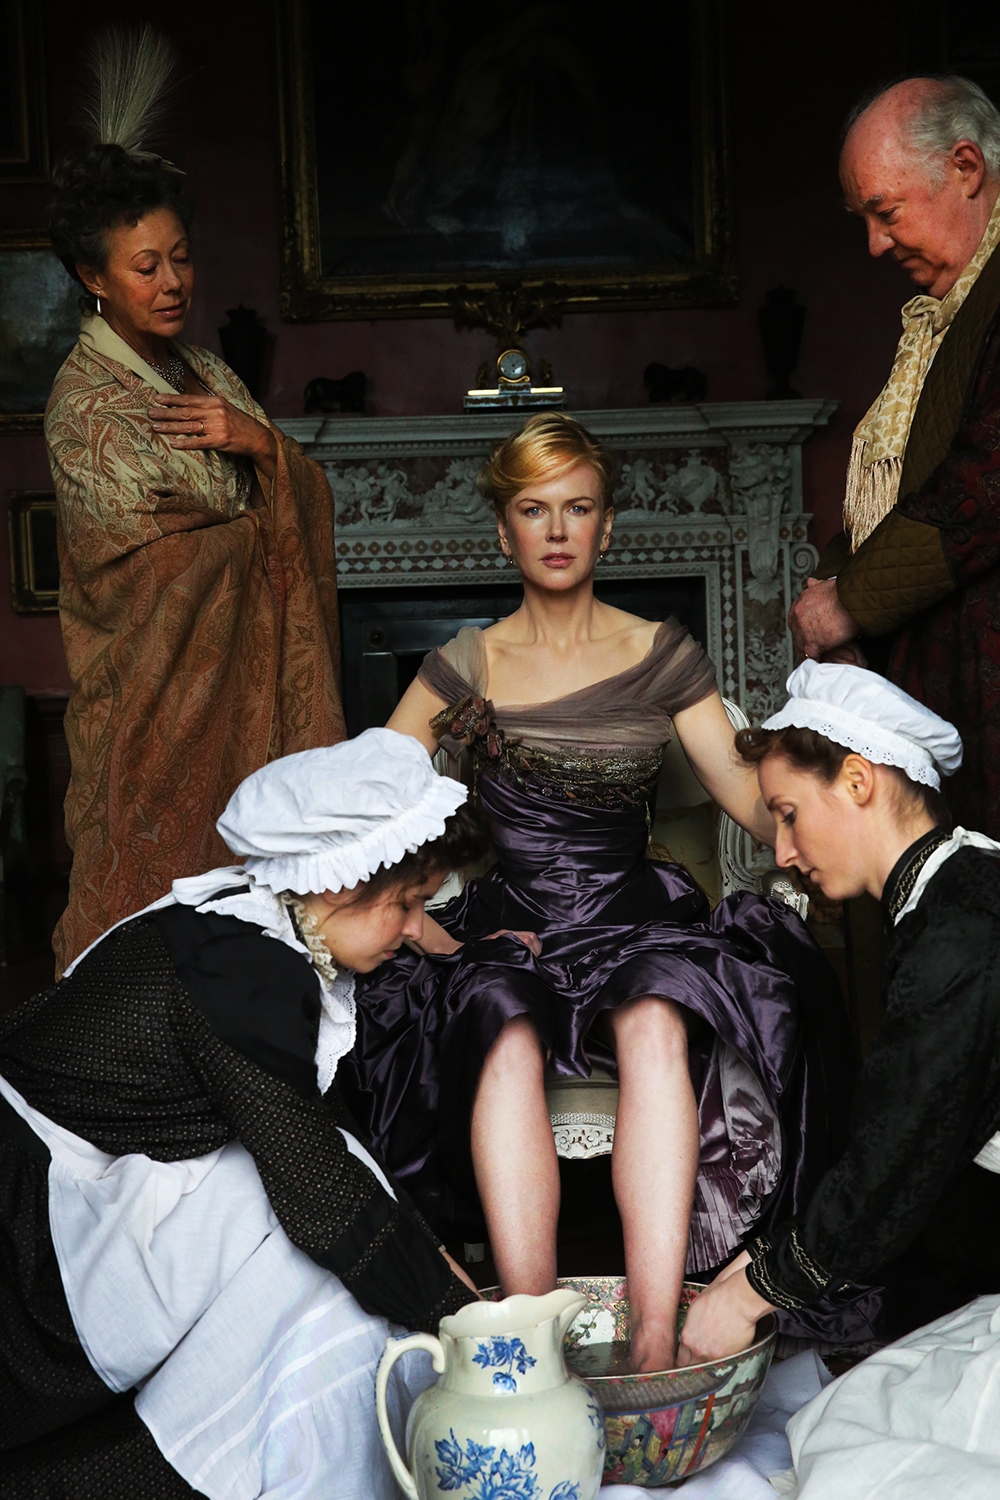 A blonde woman sits on an ornate chair and two women in black and white "maid" uniforms wash her feet in a porcelain bowl. An elderly man and woman stand to the right and left.